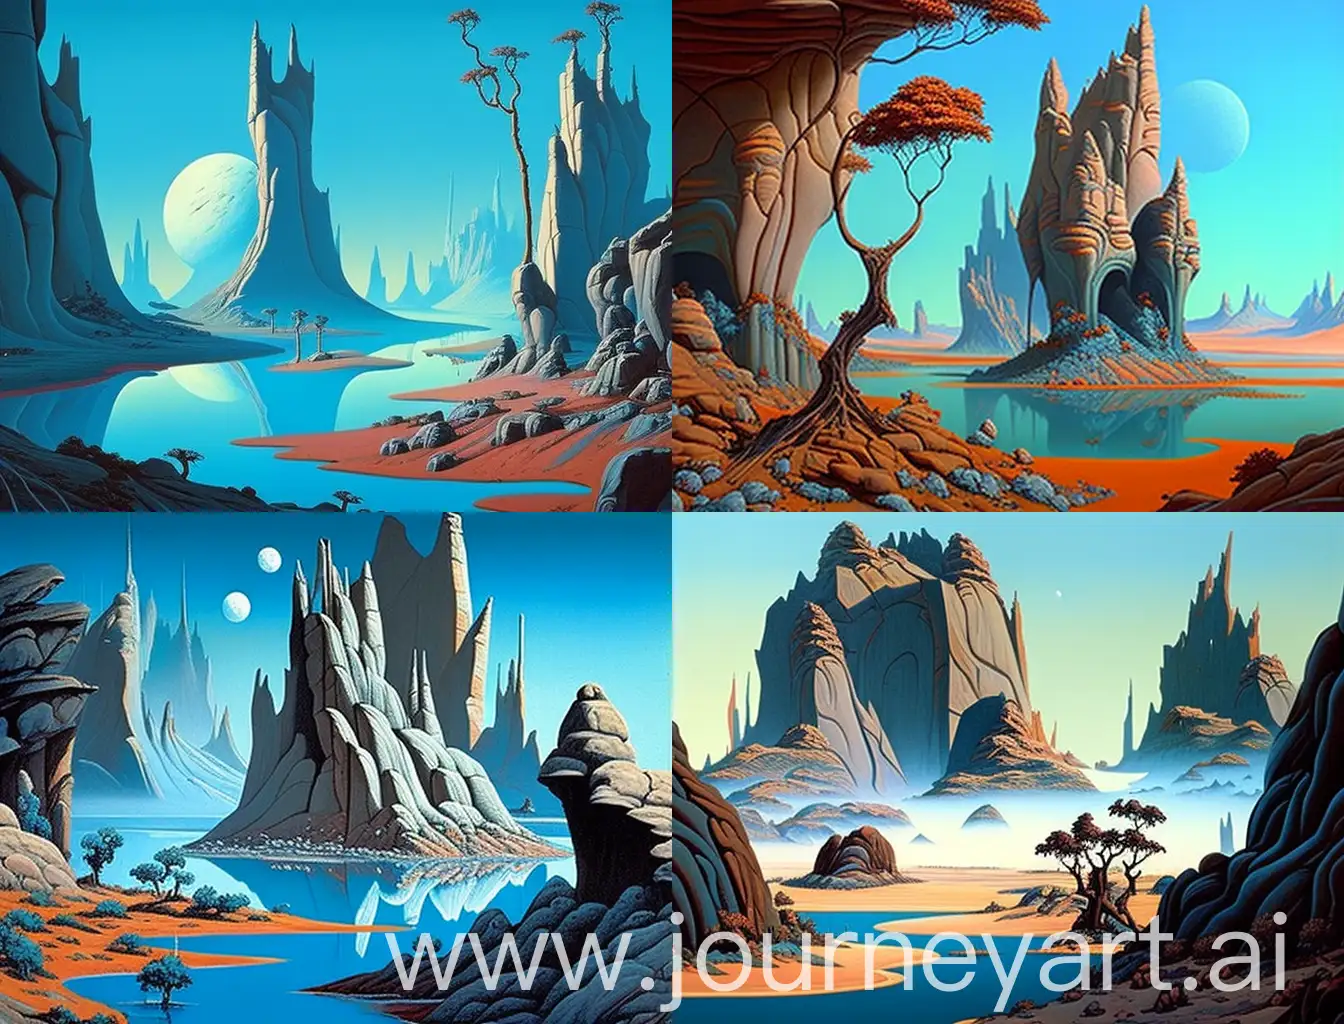 Surreal-Retro-Alien-Landscape-Blue-Lakes-and-Tall-Rocks-in-Color